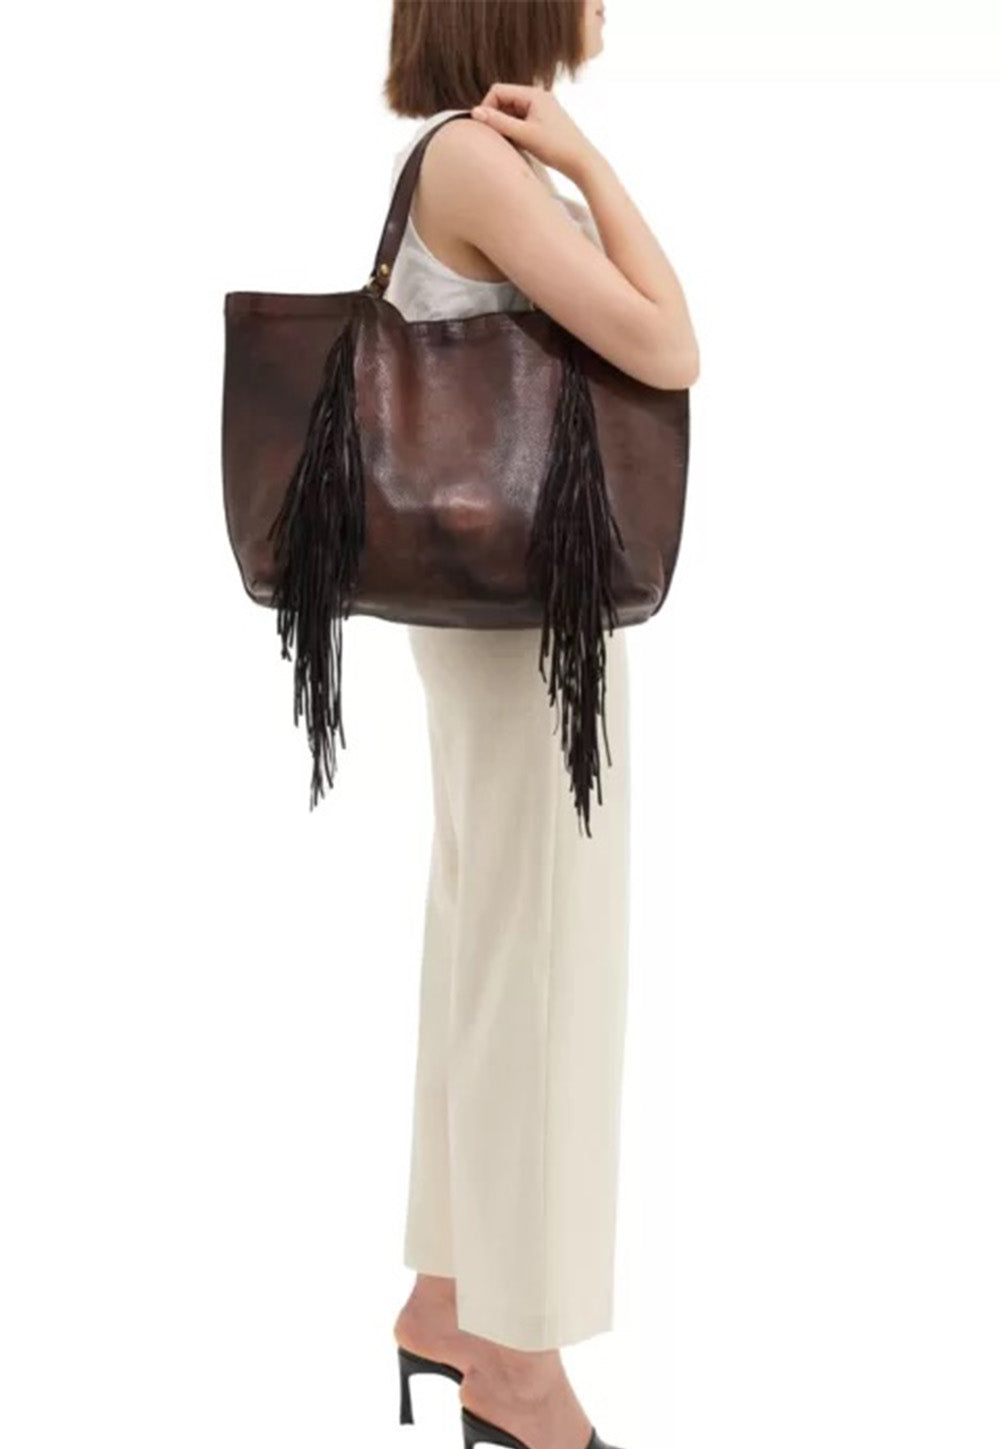 Leather Shopping Bag w Fringes - Brown sold by Angel Divine